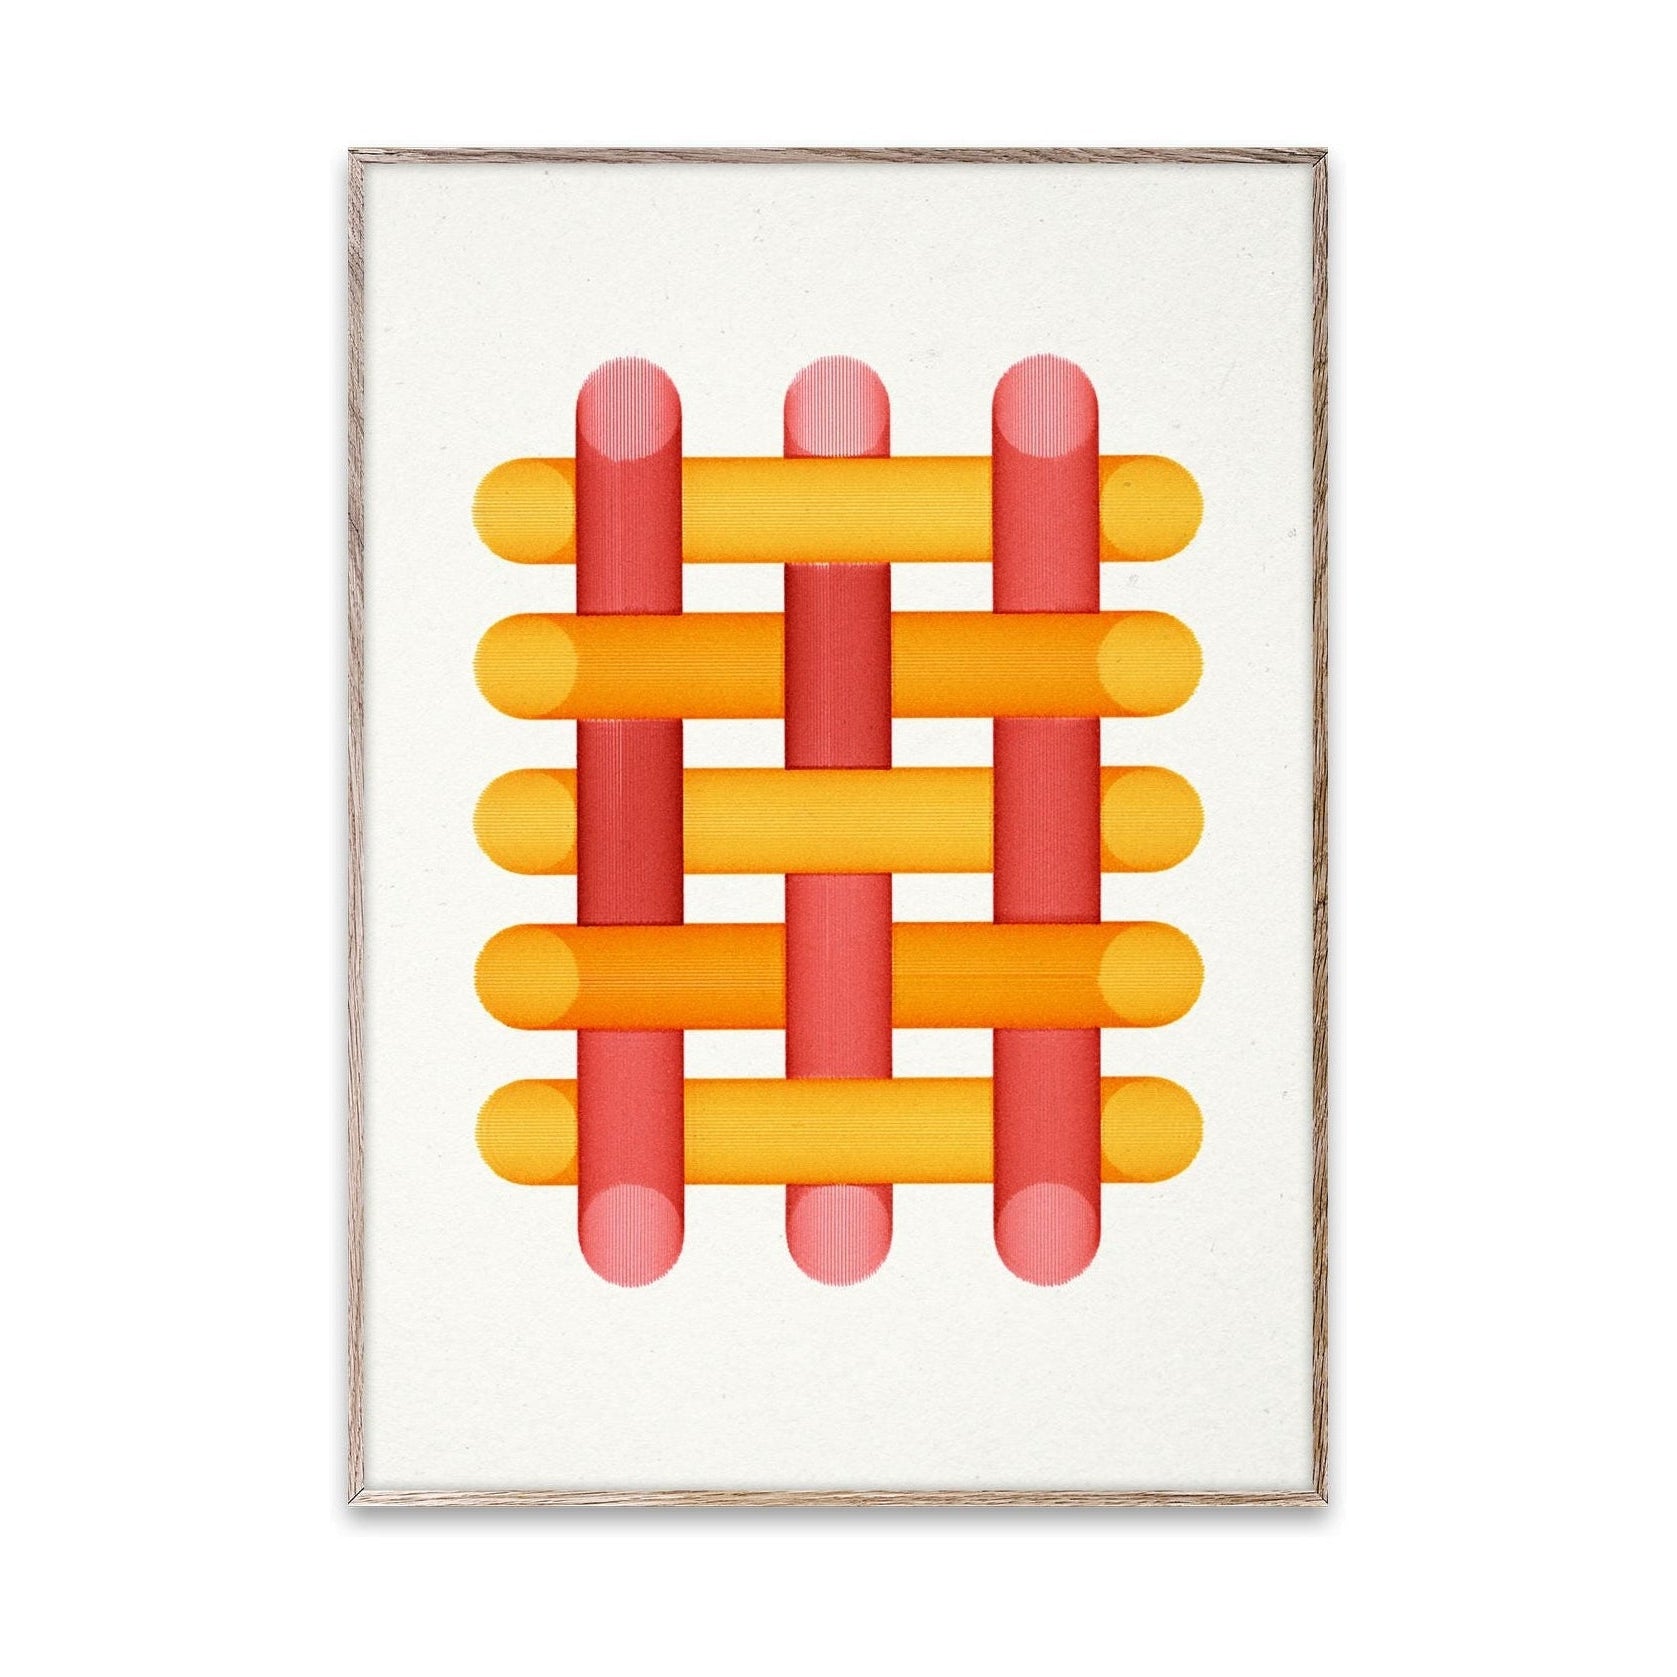 Paper Collective The Weave Poster, 30x40 Cm